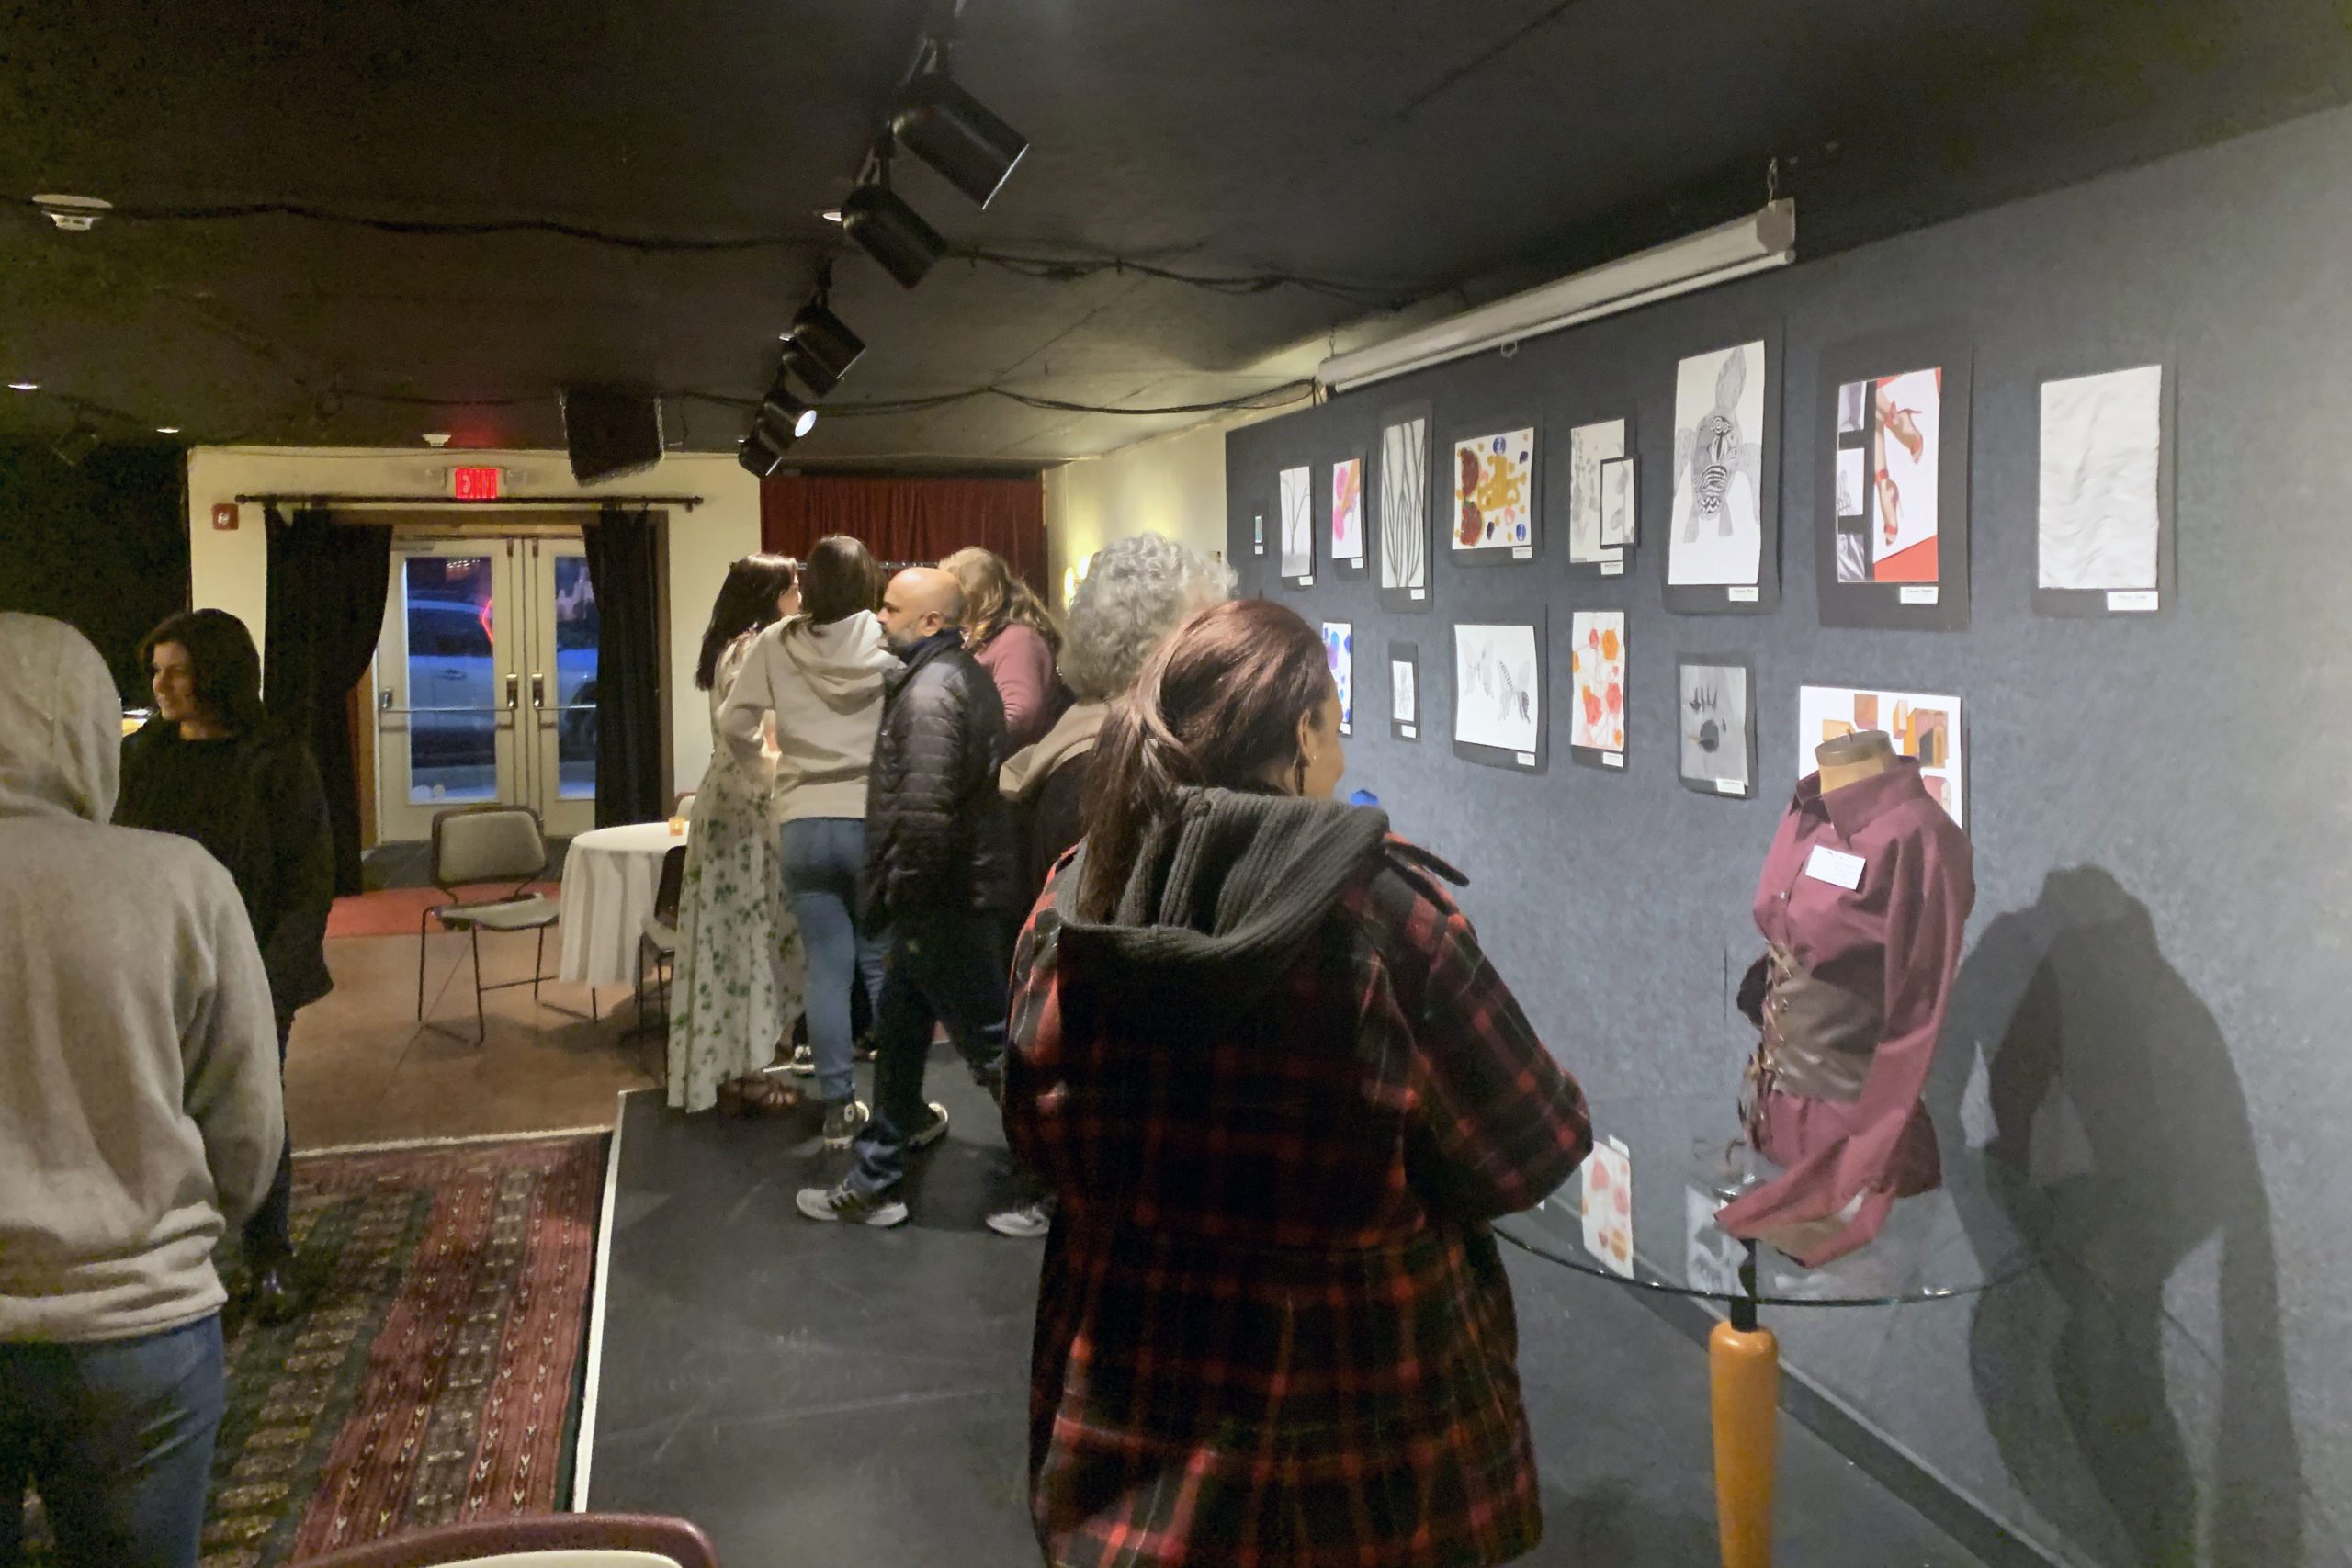 crowd checks out student drawings, sculpture, and fashion on display